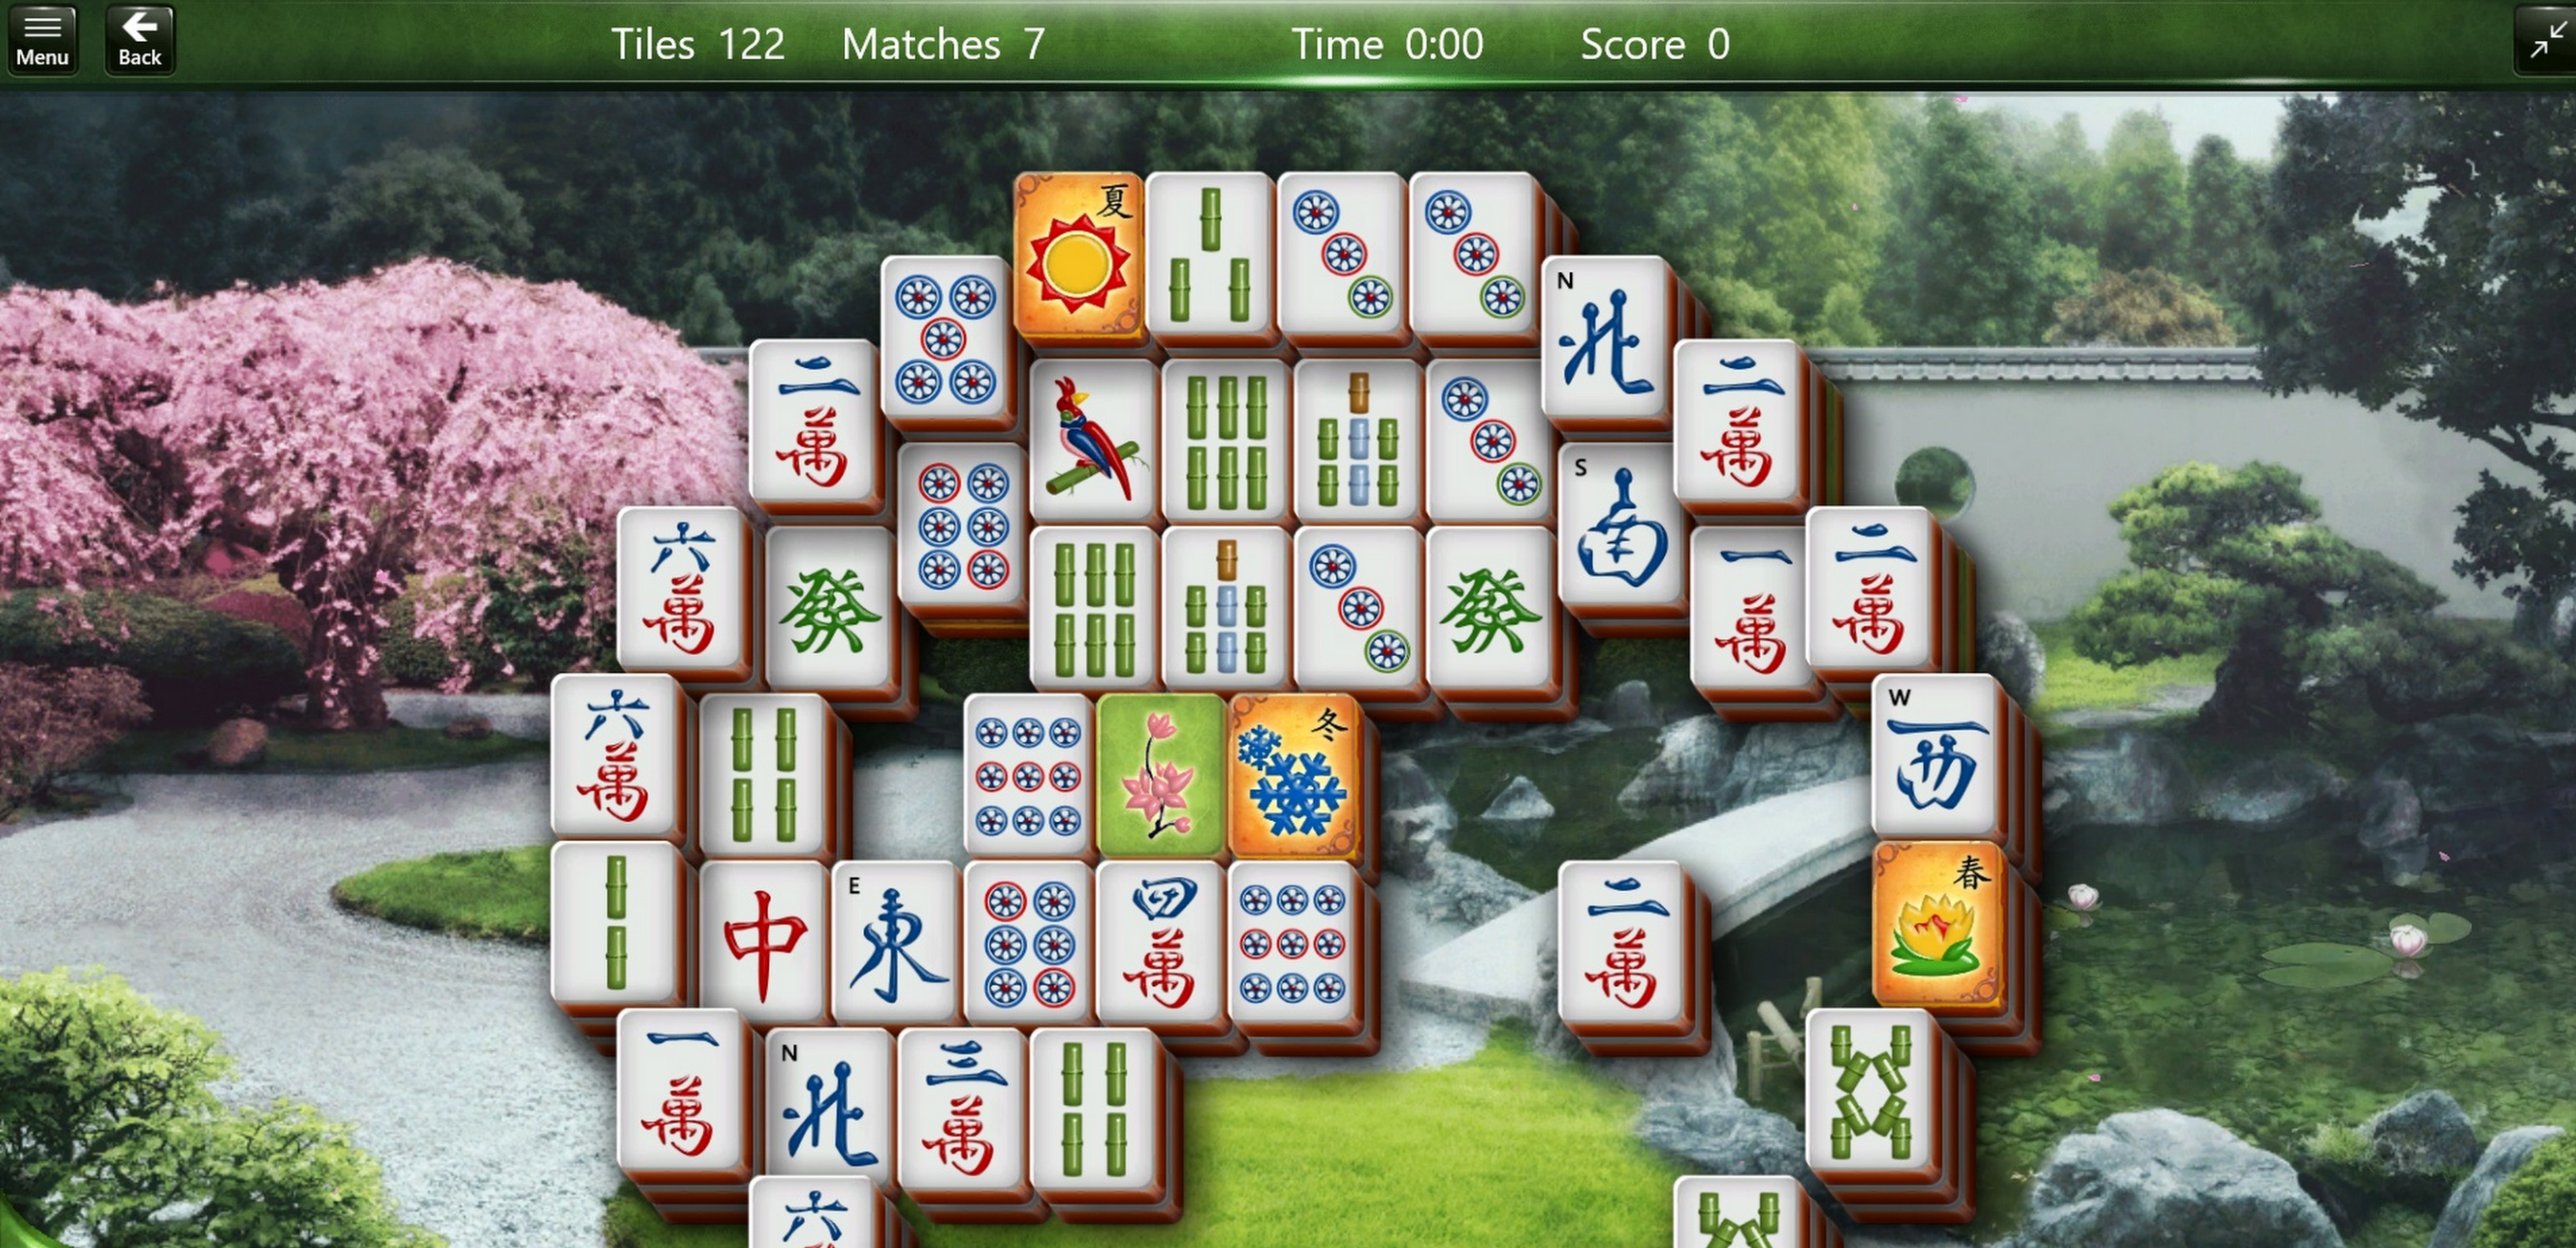 New themes, challenges and more in Microsoft Mahjong for Windows 10